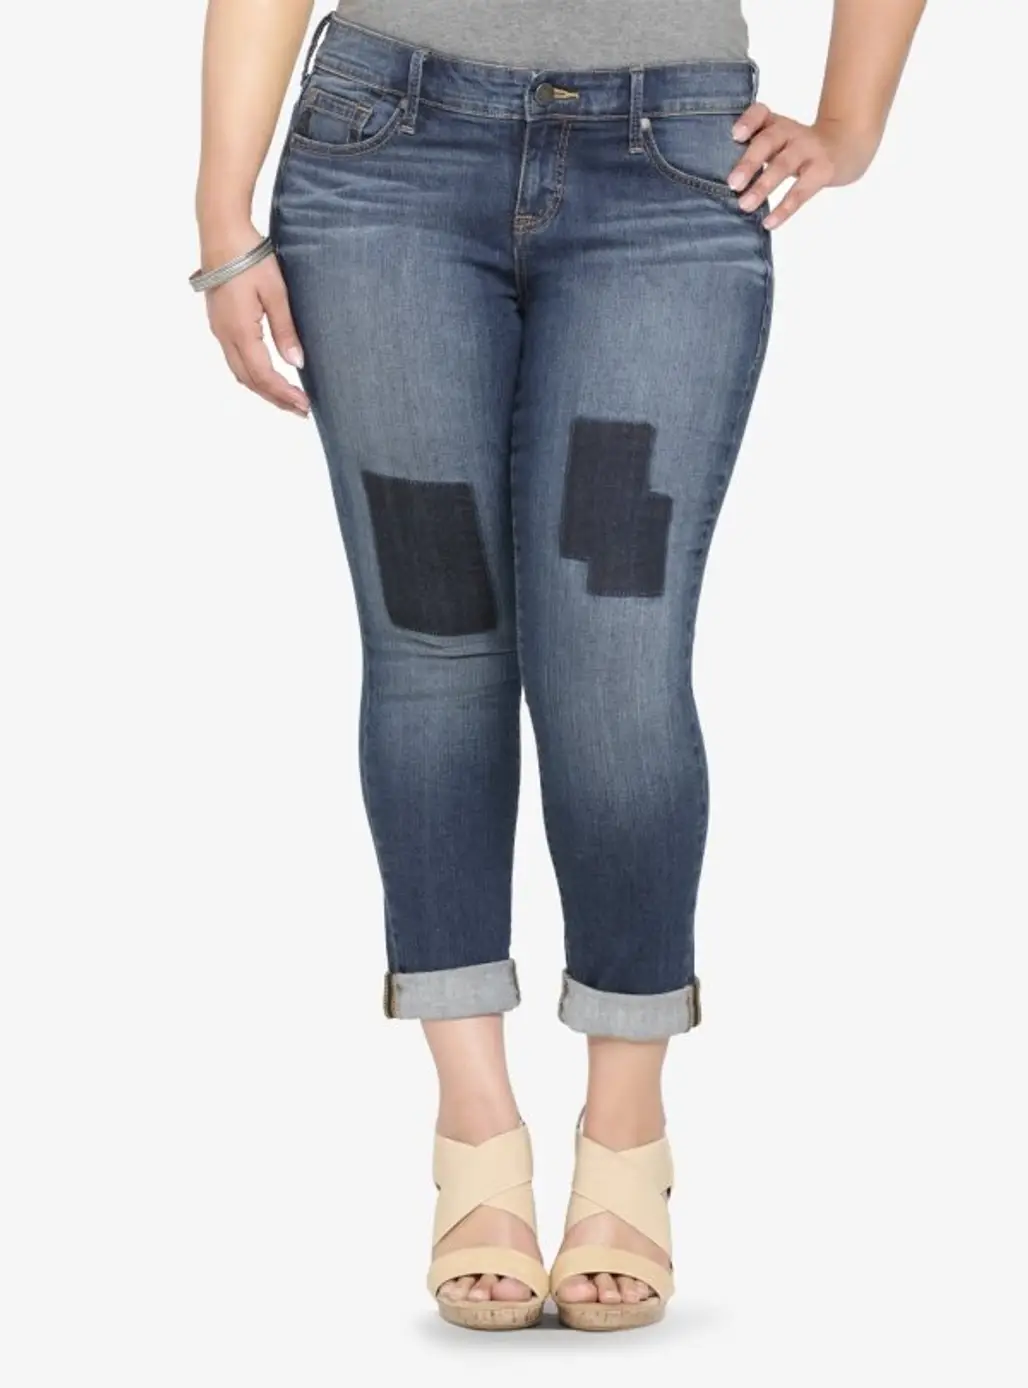 Torrid Cropped Skinny Jean with Patches